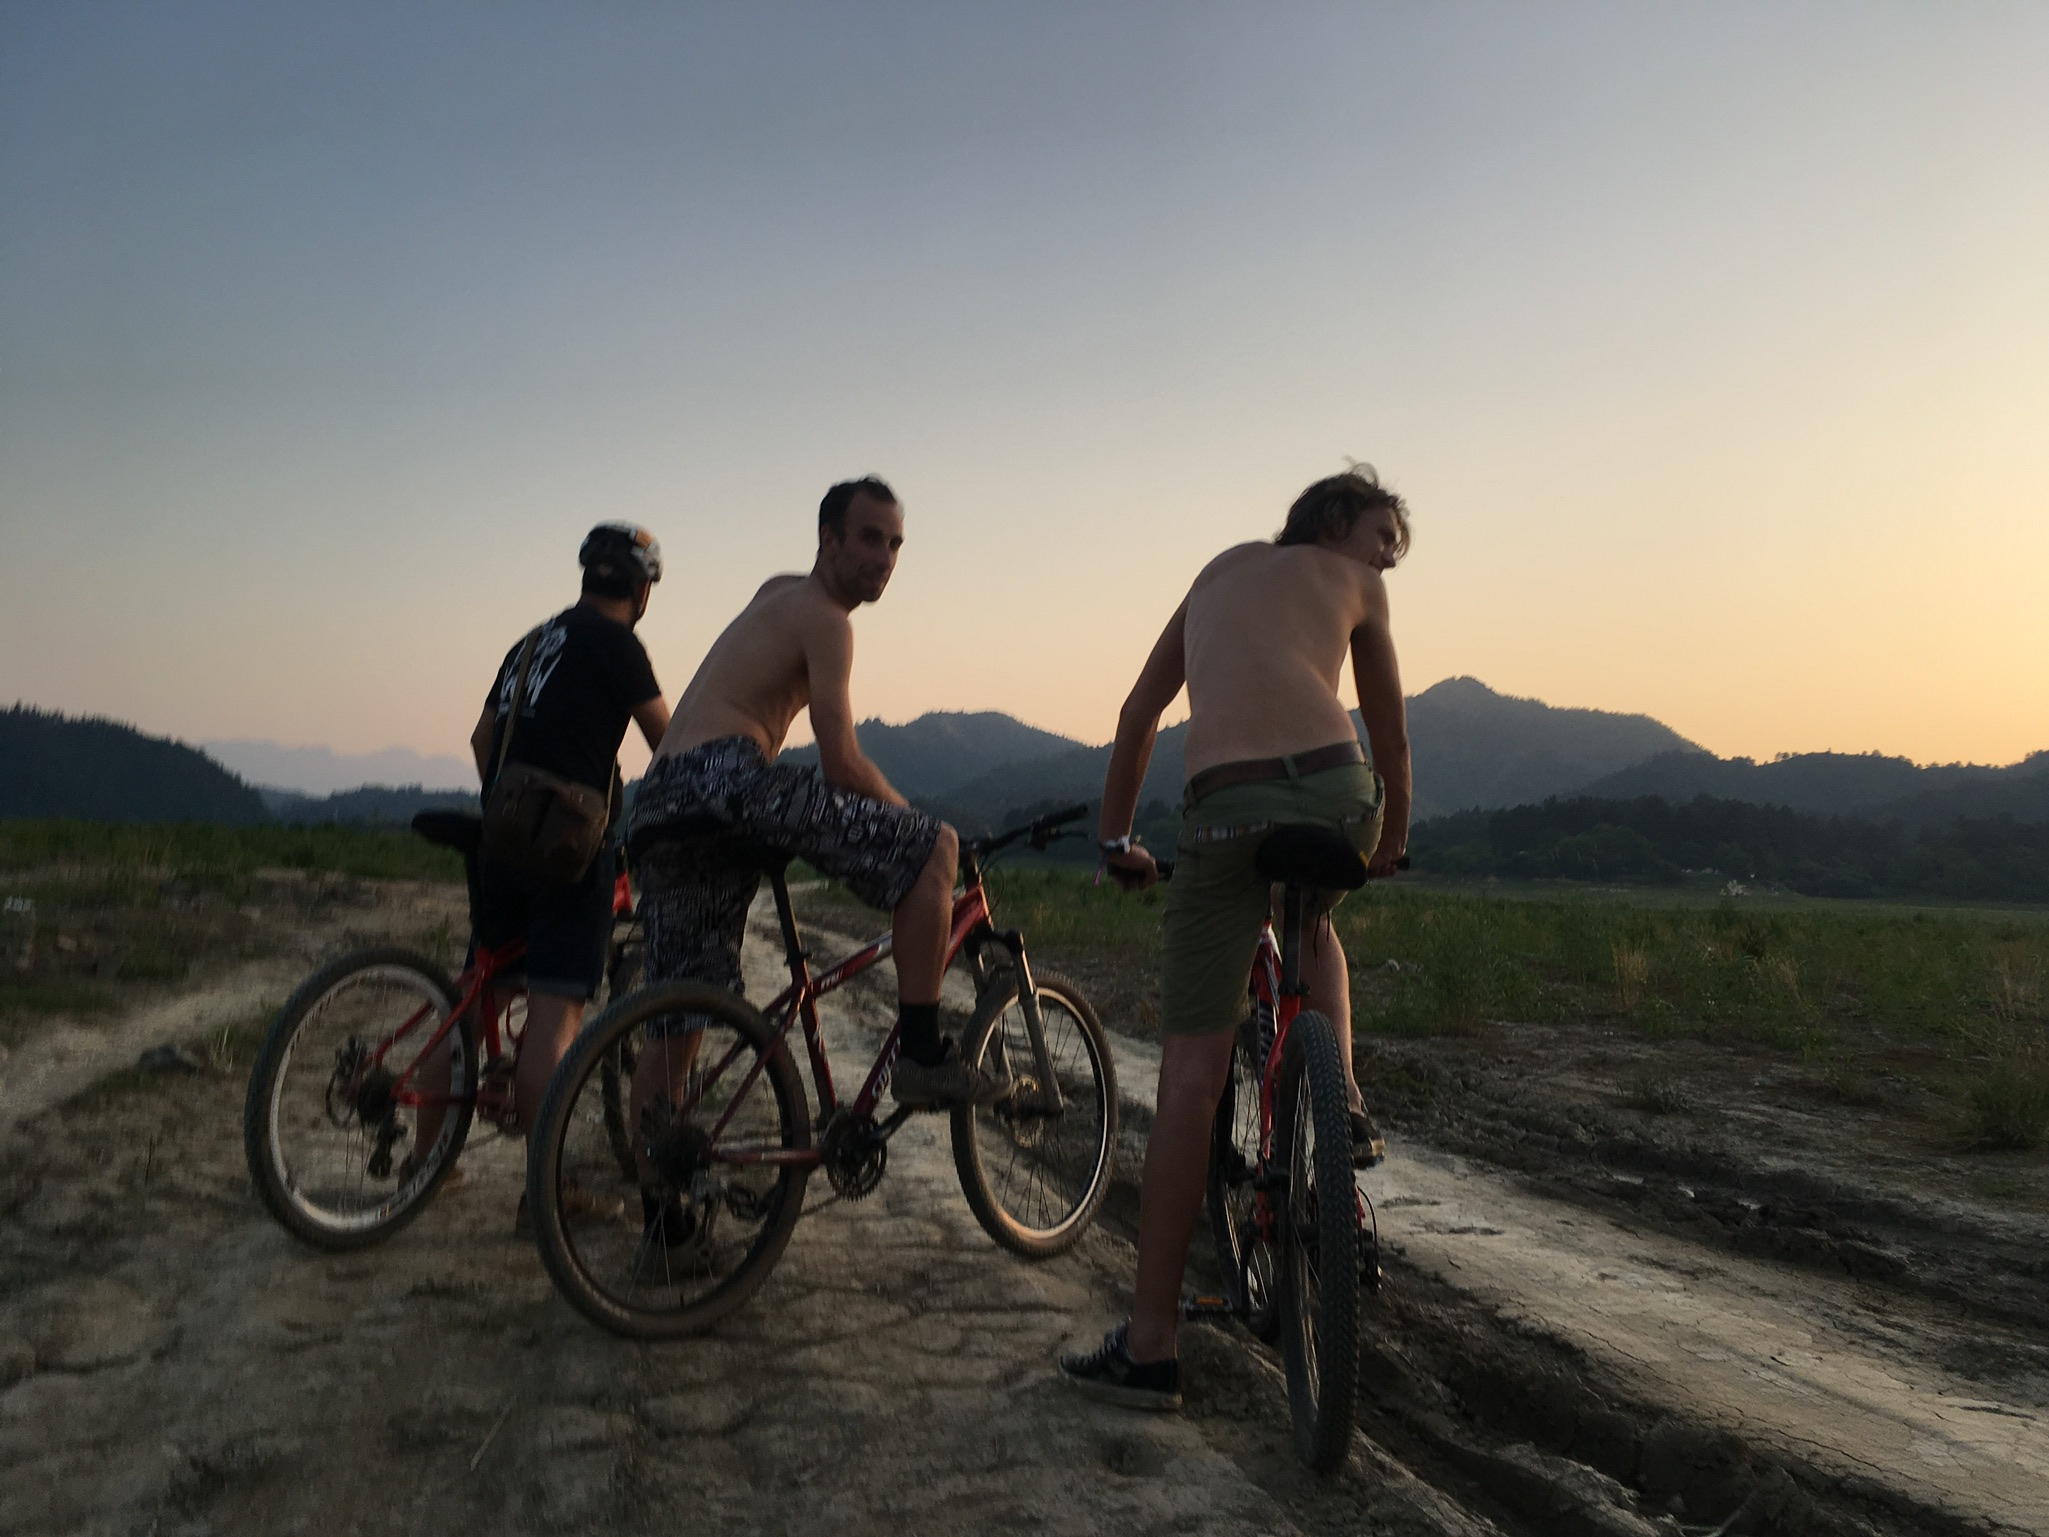 Exploring the "Playa" on bike - Picture by Armands Strauja